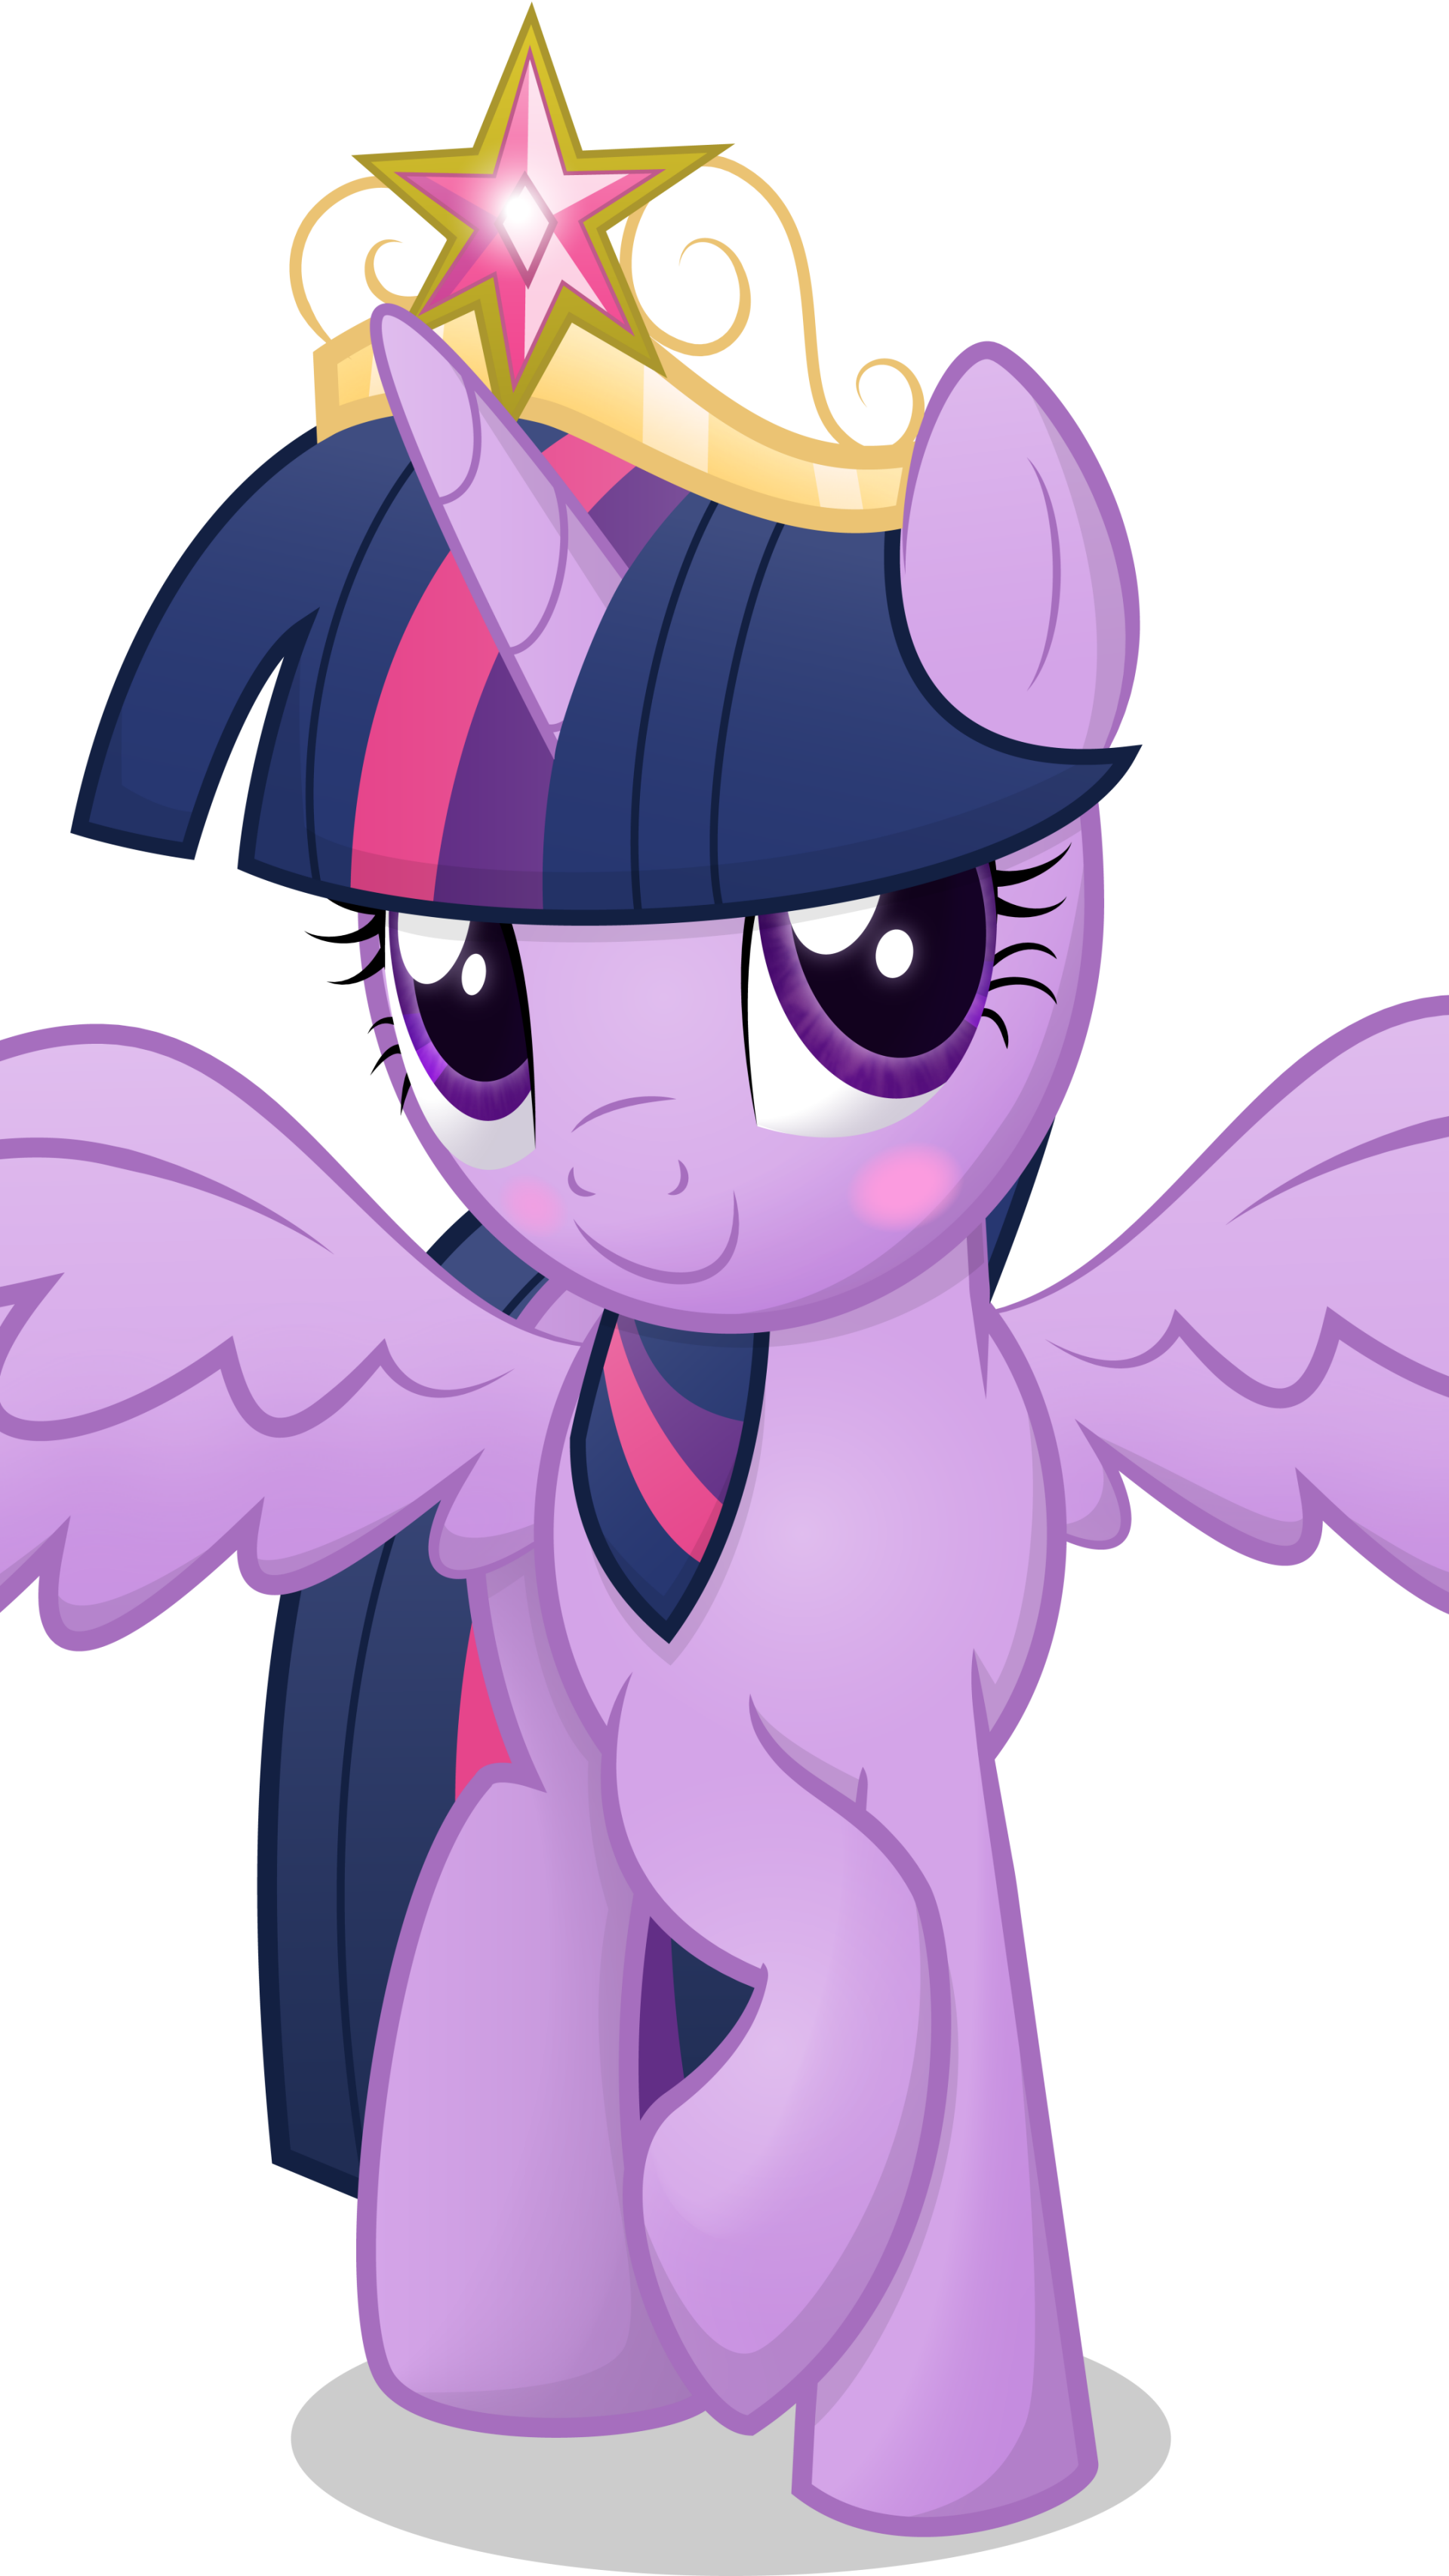 twilight-sparkle-phone-wallpapers